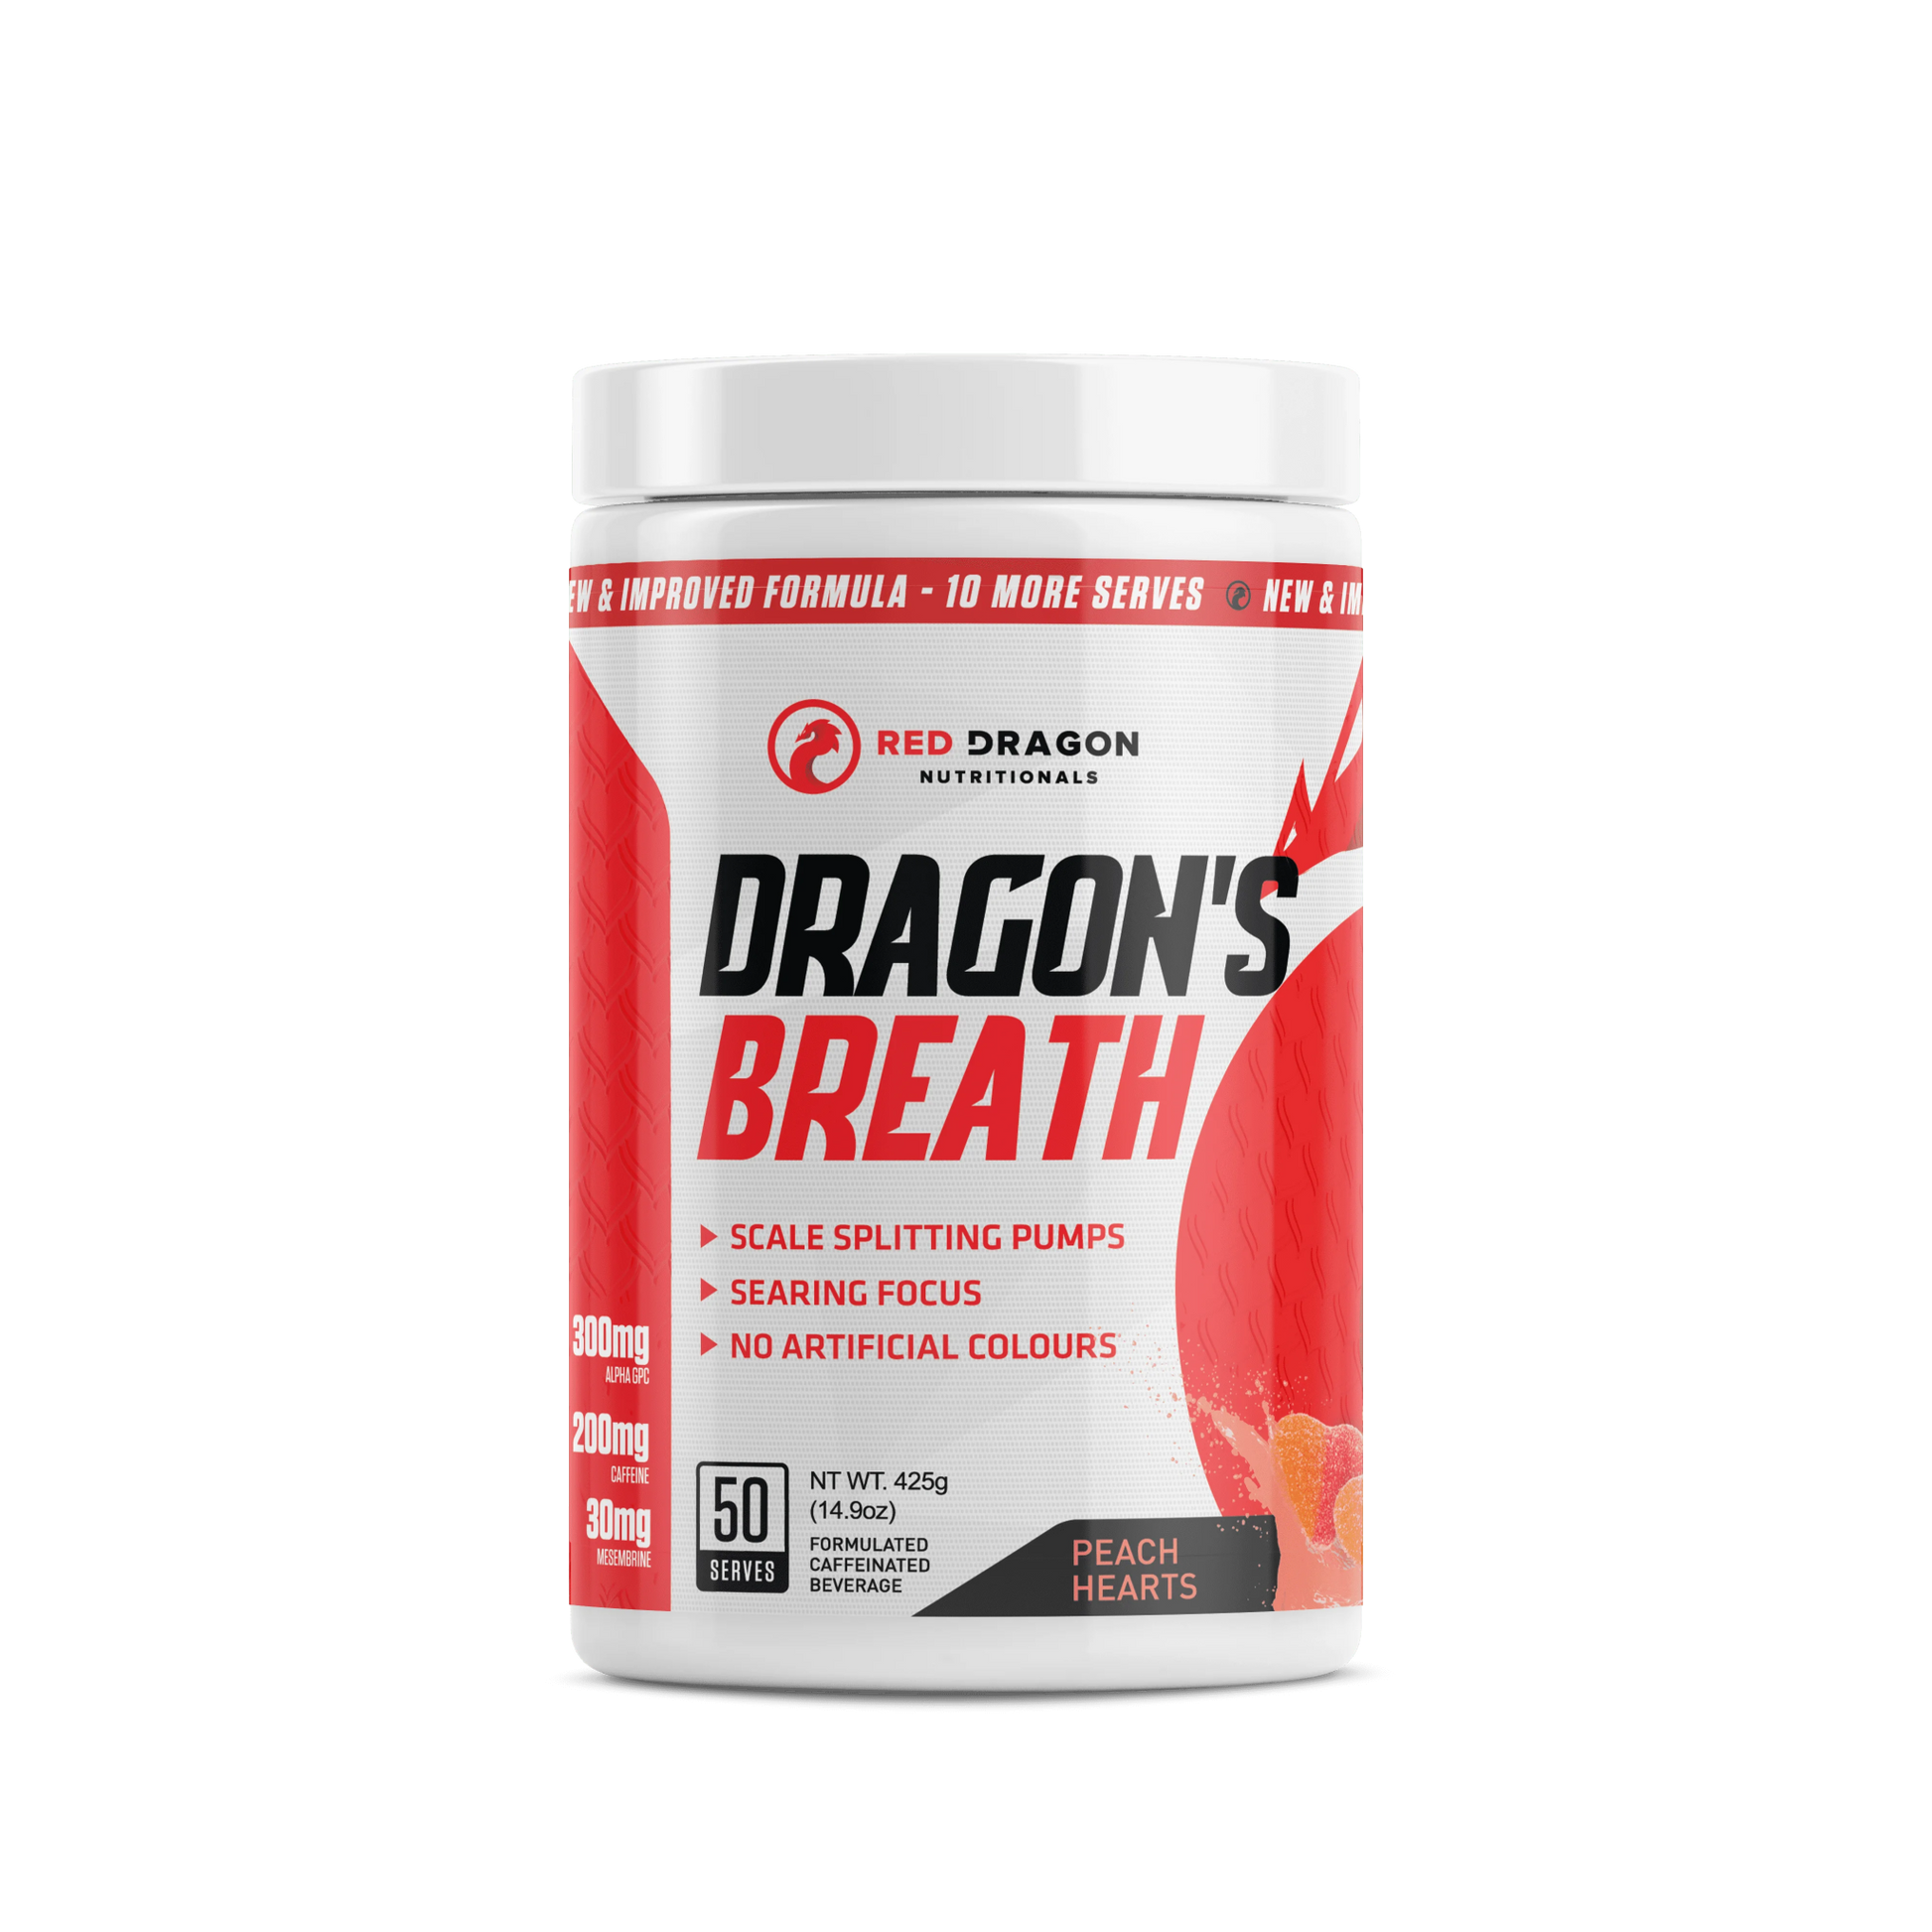 Red Dragon Nutritionals - Dragon's Breath Pre-Workout - Supplements - 50 Serves - The Cave Gym